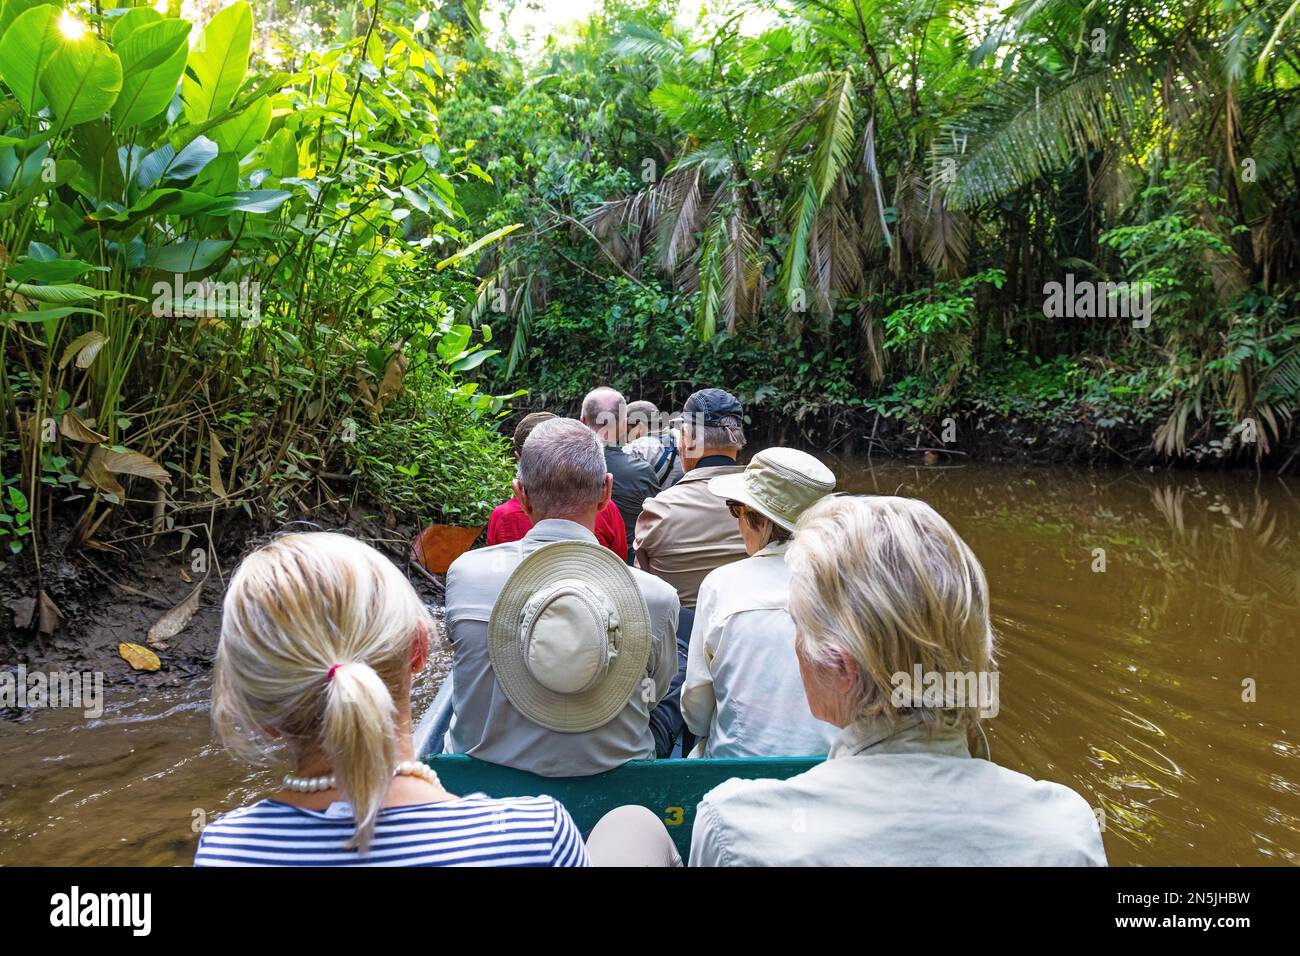 Group of unrecognizable people on wildlife canoe trip in Amazon rainforest, tourists looking for animals. Stock Photo